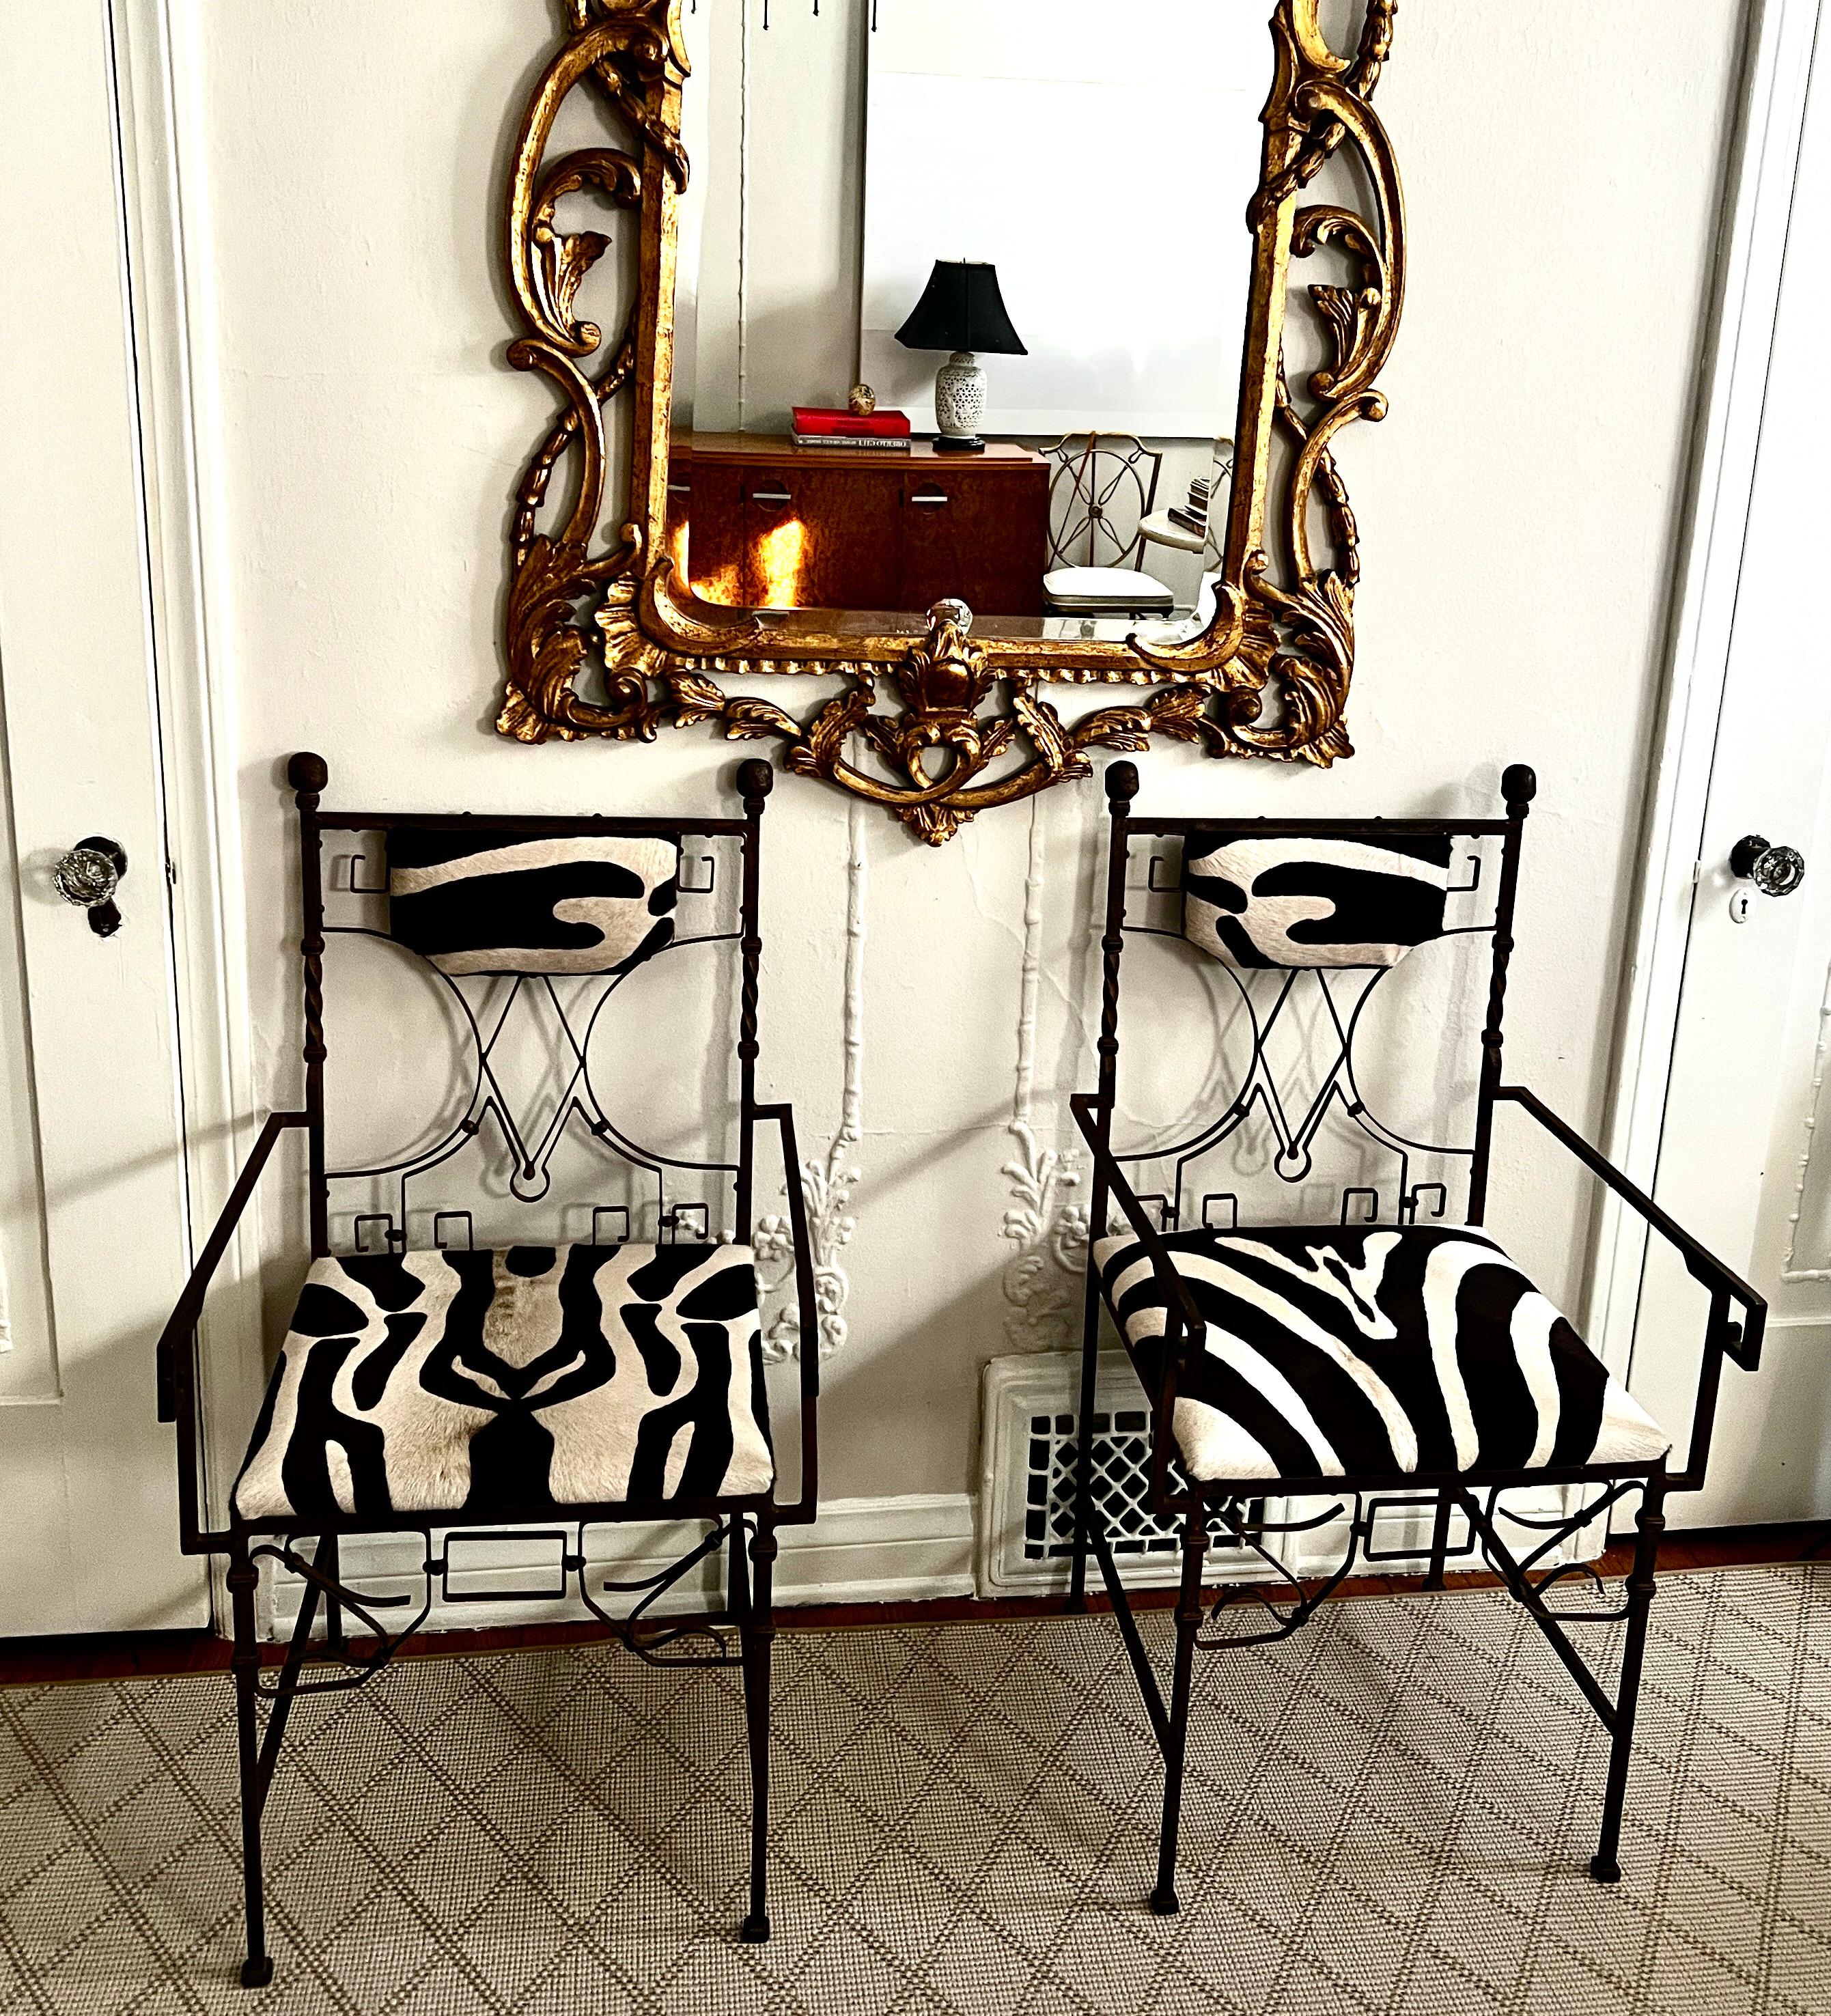 An exquisite pair of beautifully designed French Art Deco wrought iron Chairs upholstered in Zebra printed Cowhide.

Use the pair as an art statement flanking a doorway, use in a dining or breakfast room.  The Zebra is a beautiful statement and a